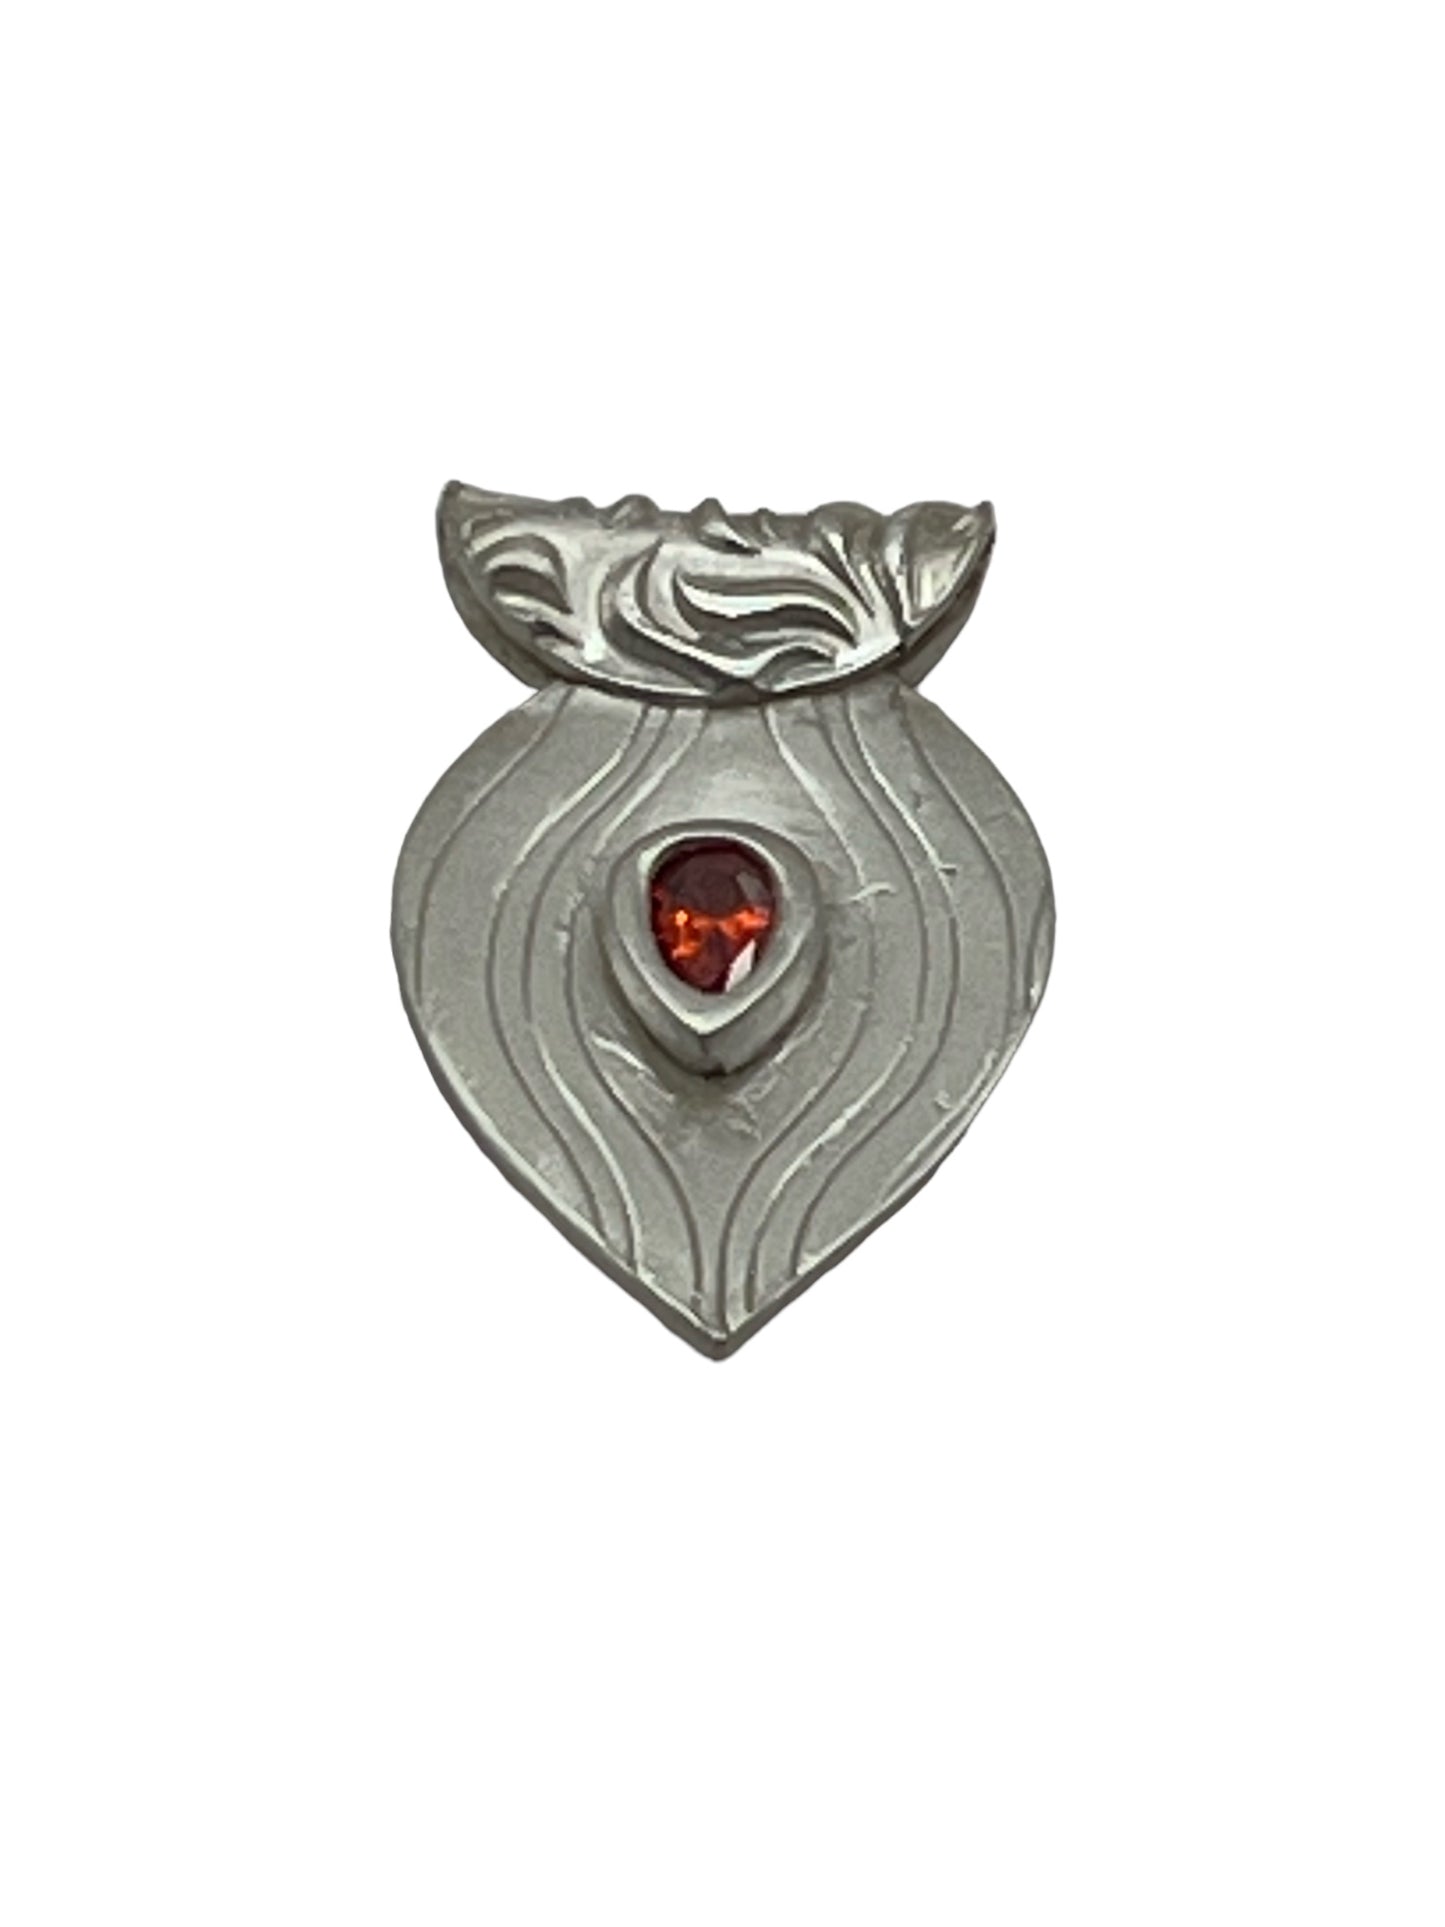 Free Flow Pear Inspired .9999 Fine Silver Pendant with Fire Opal CZ